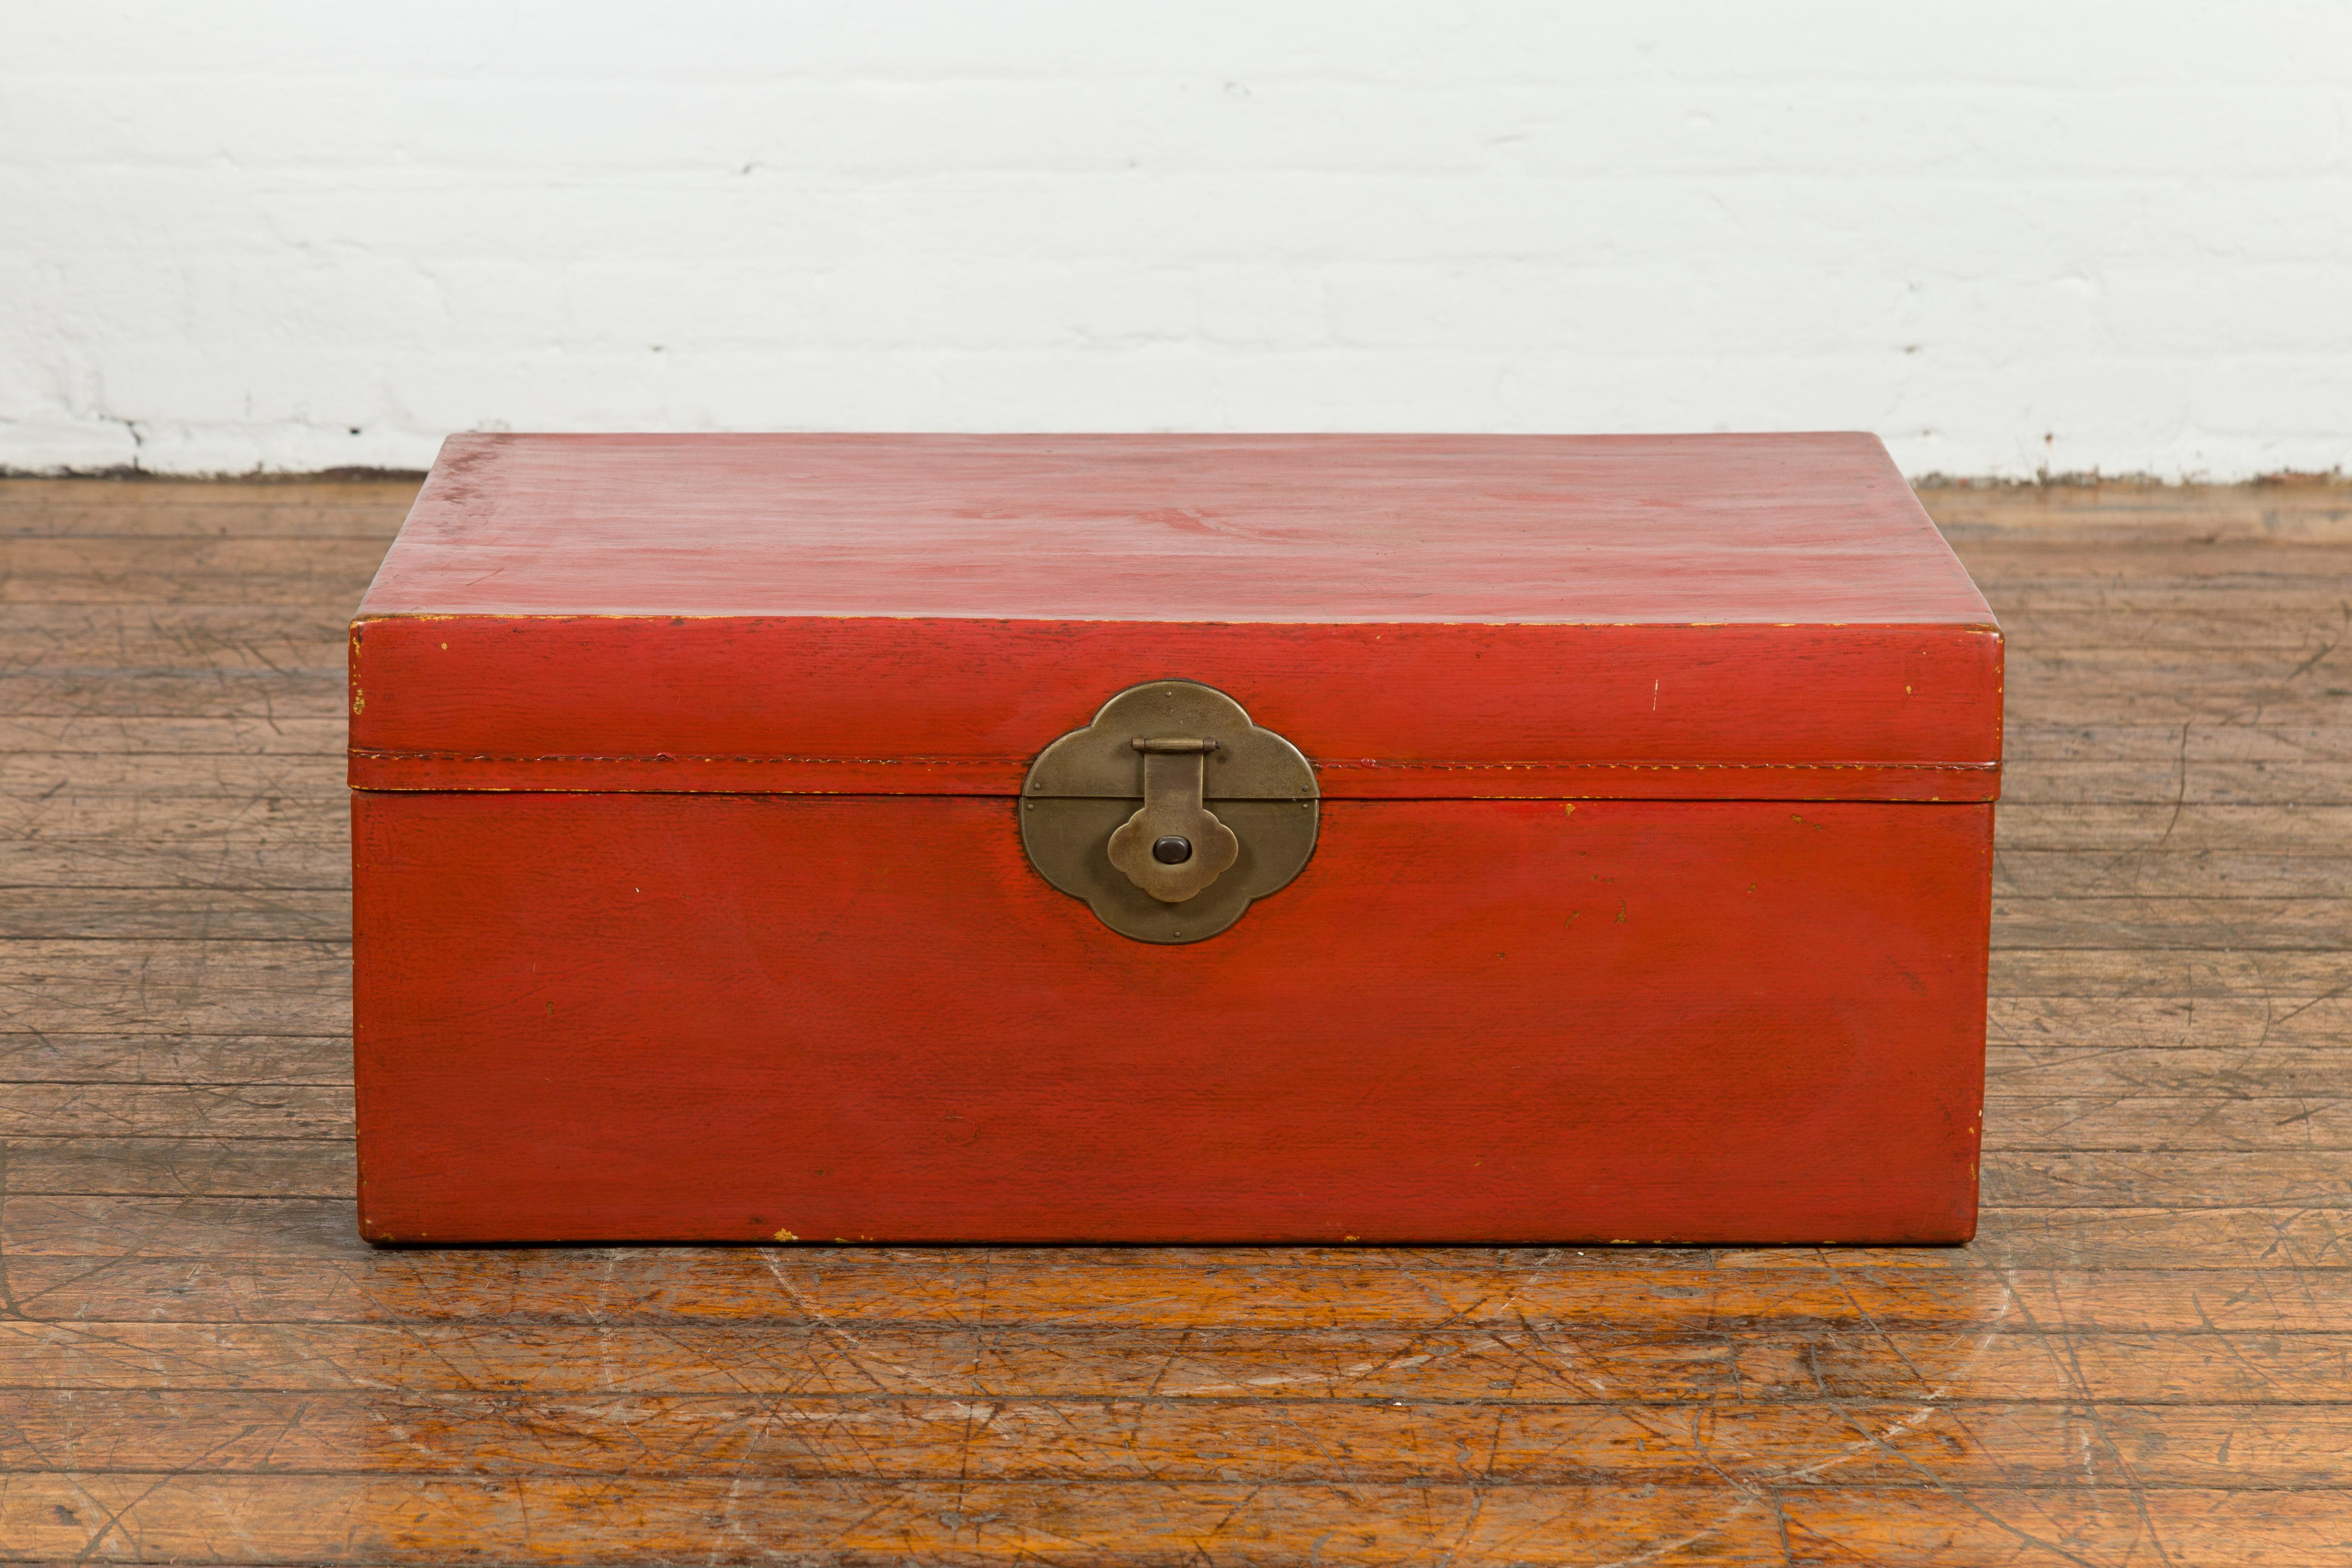 A vintage Chinese blanket chest from the Mid-20th Century with red lacquered leather, brass hardware and blue fabric lining on the inside. Created in China during the midcentury period, this red lacquered leather trunk features a rectangular lid